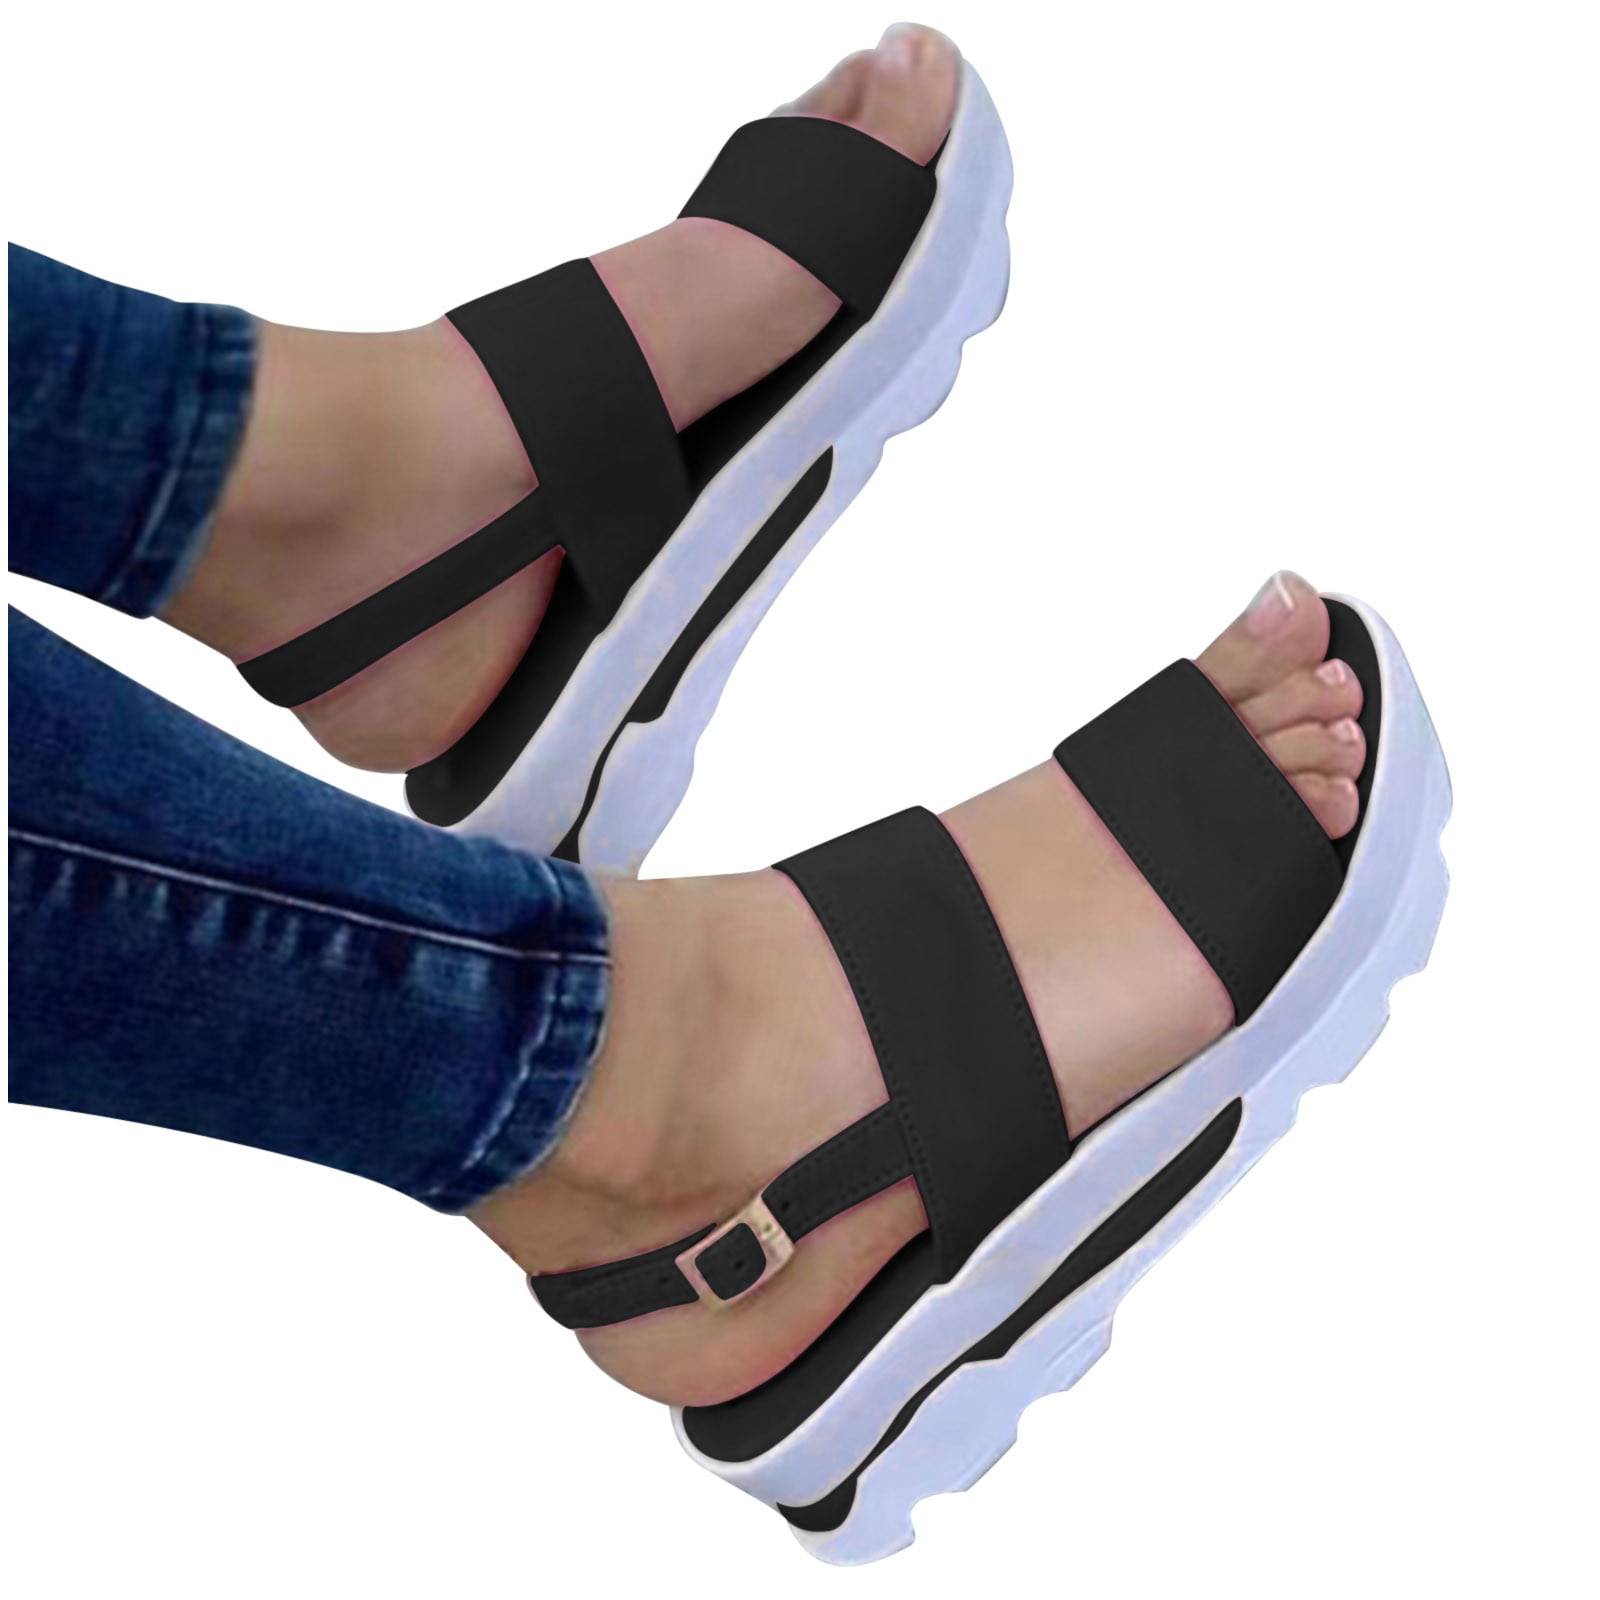 2021 Slippers Women Summer Square Toe Casual Flat Ladies